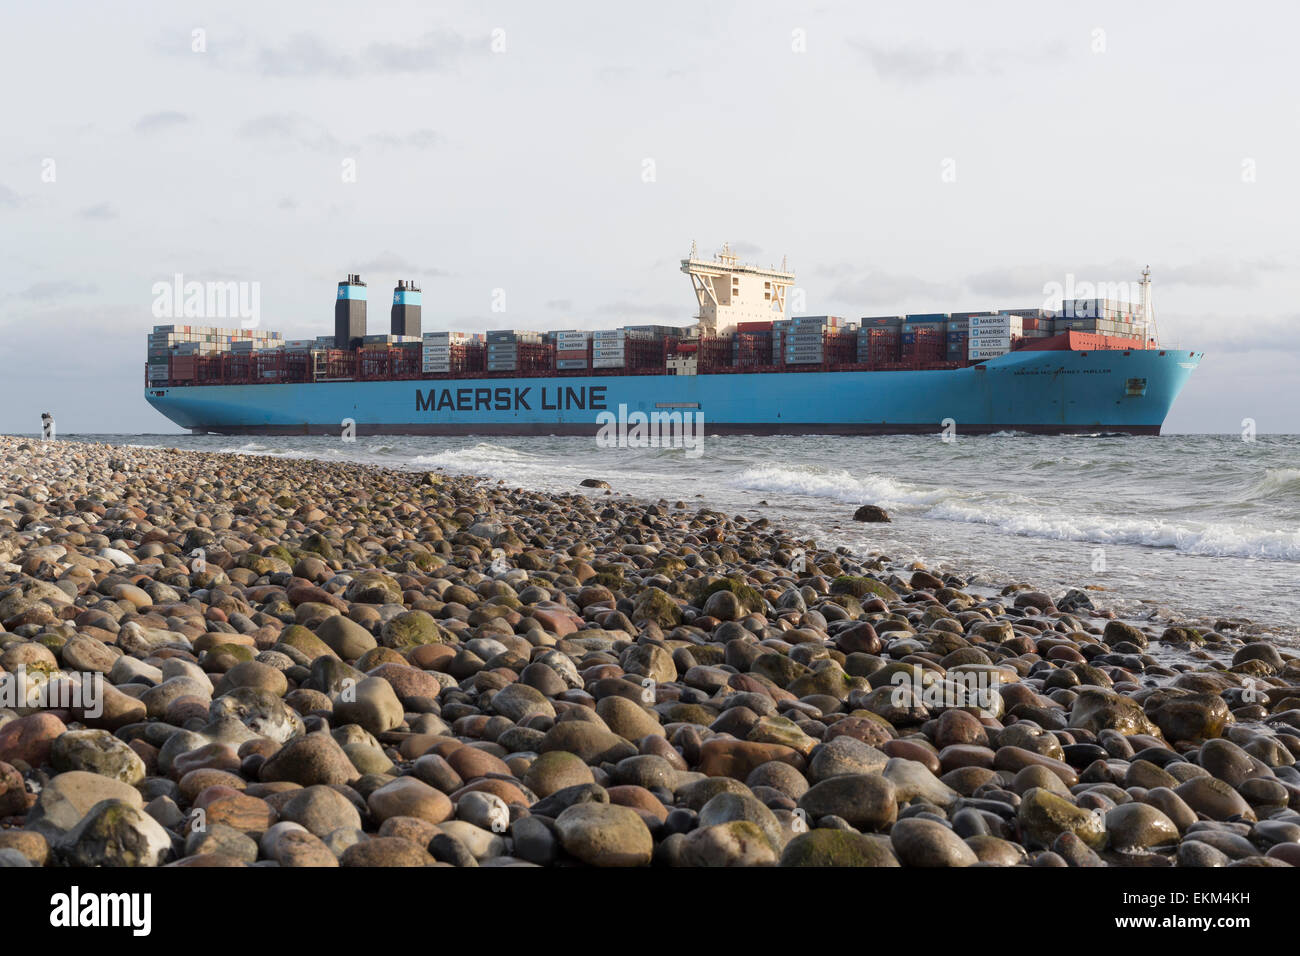 A huge Triple-E-container vessel from Maersk Line passes Sletterhage on its approach to Aarhus. Stock Photo